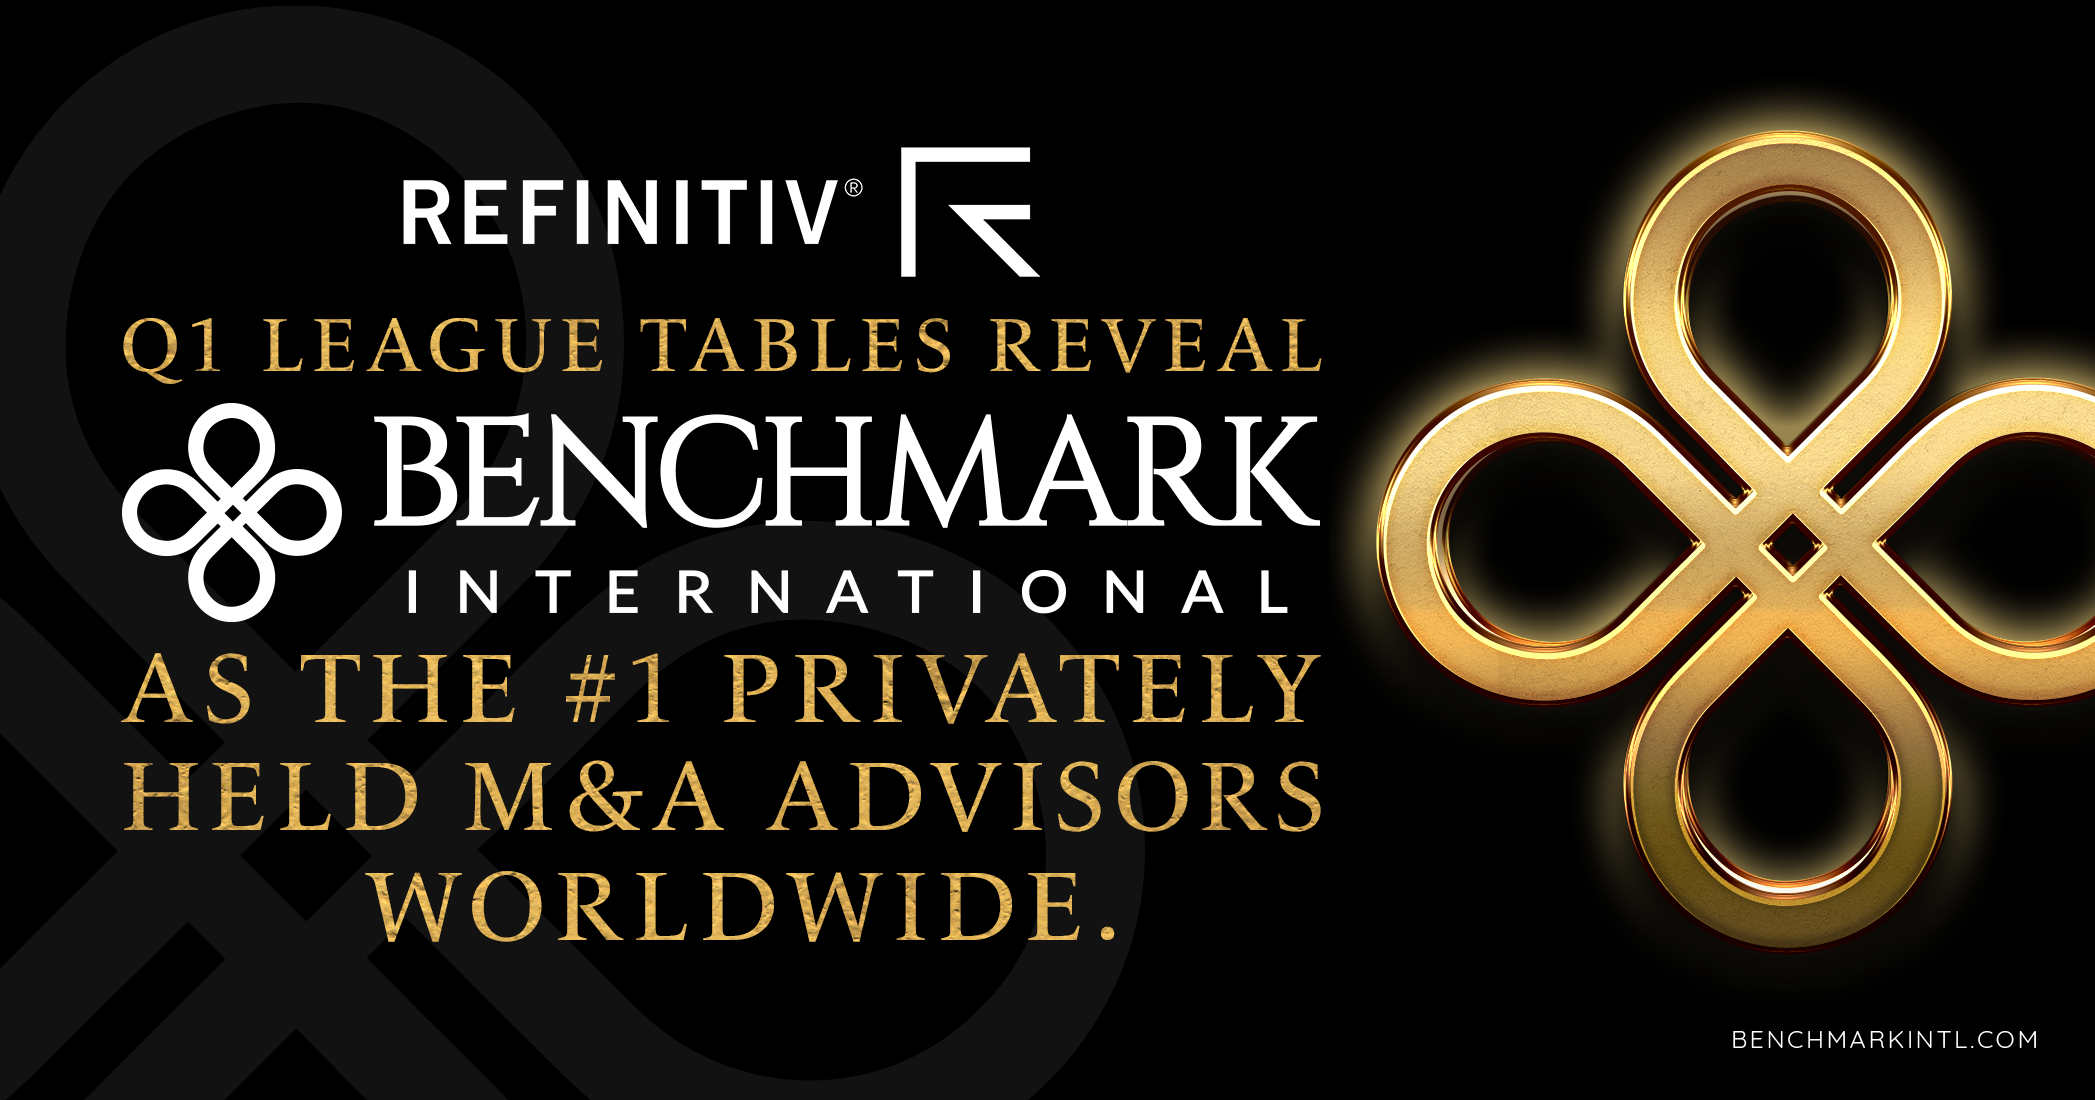 Refinitiv Q1 League Tables Reveal Benchmark as The #1 Privately Held M&A Advisors Worldwide